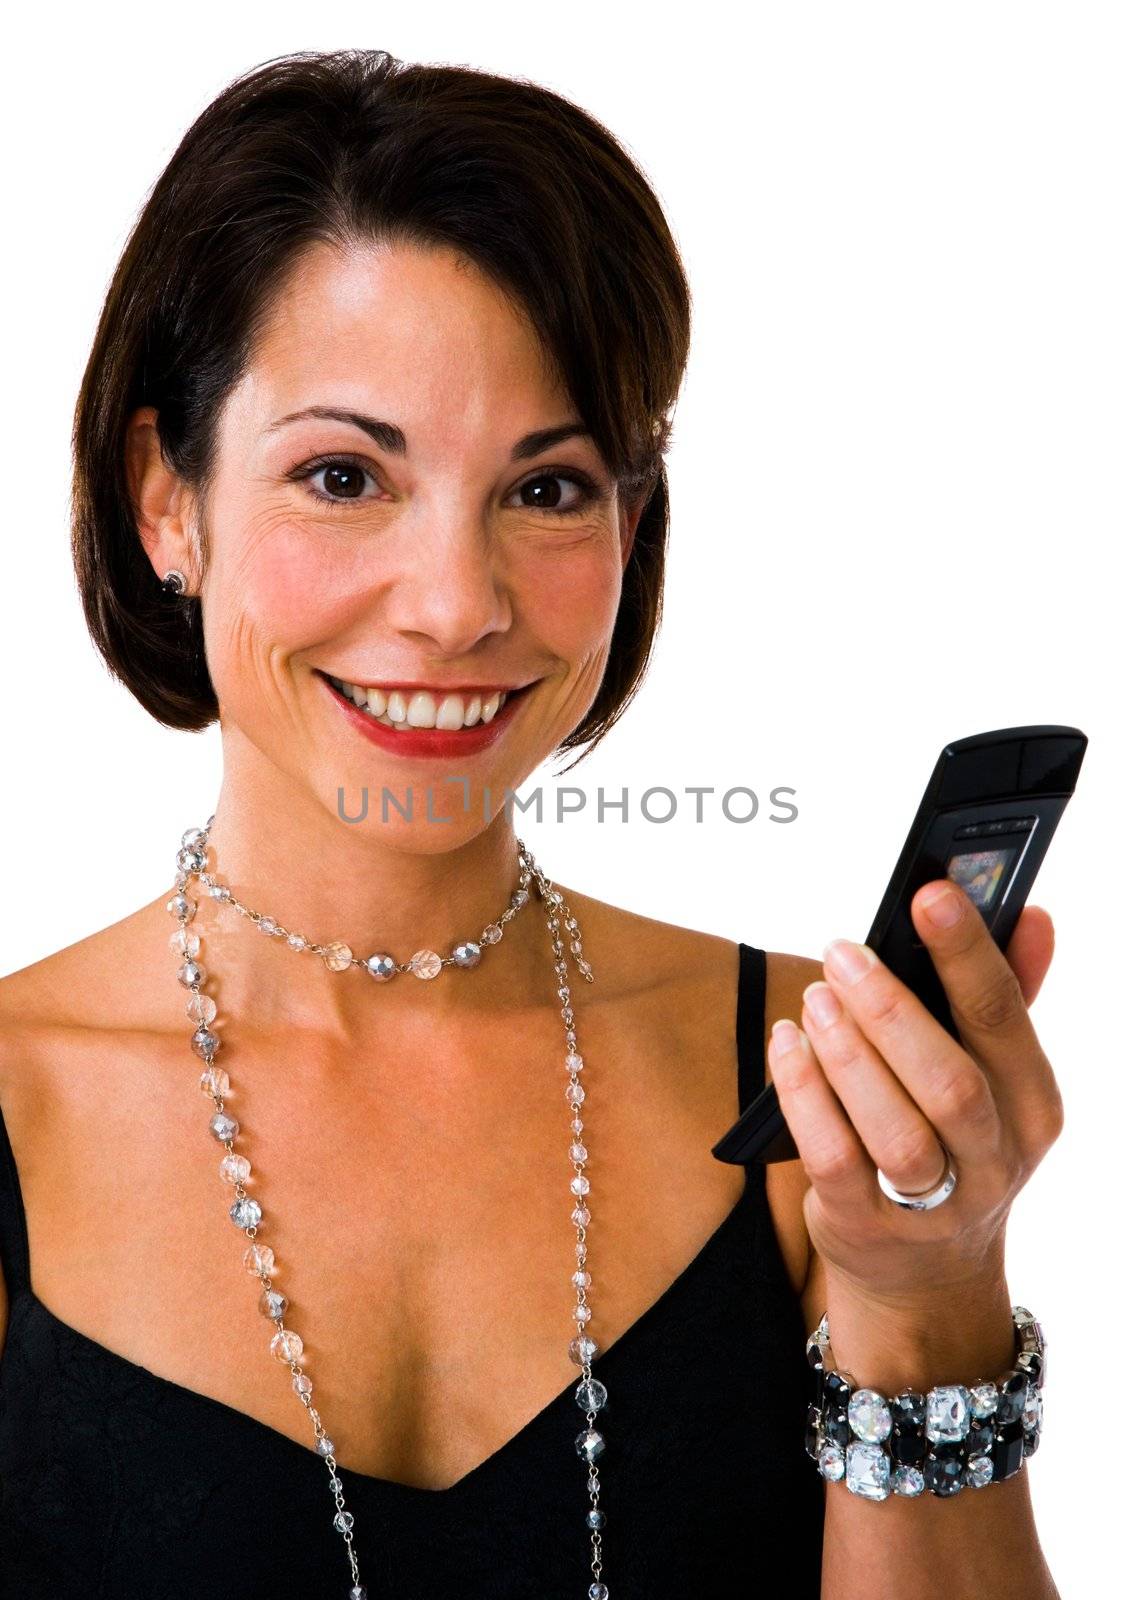 Happy woman text messaging on a mobile phone isolated over white